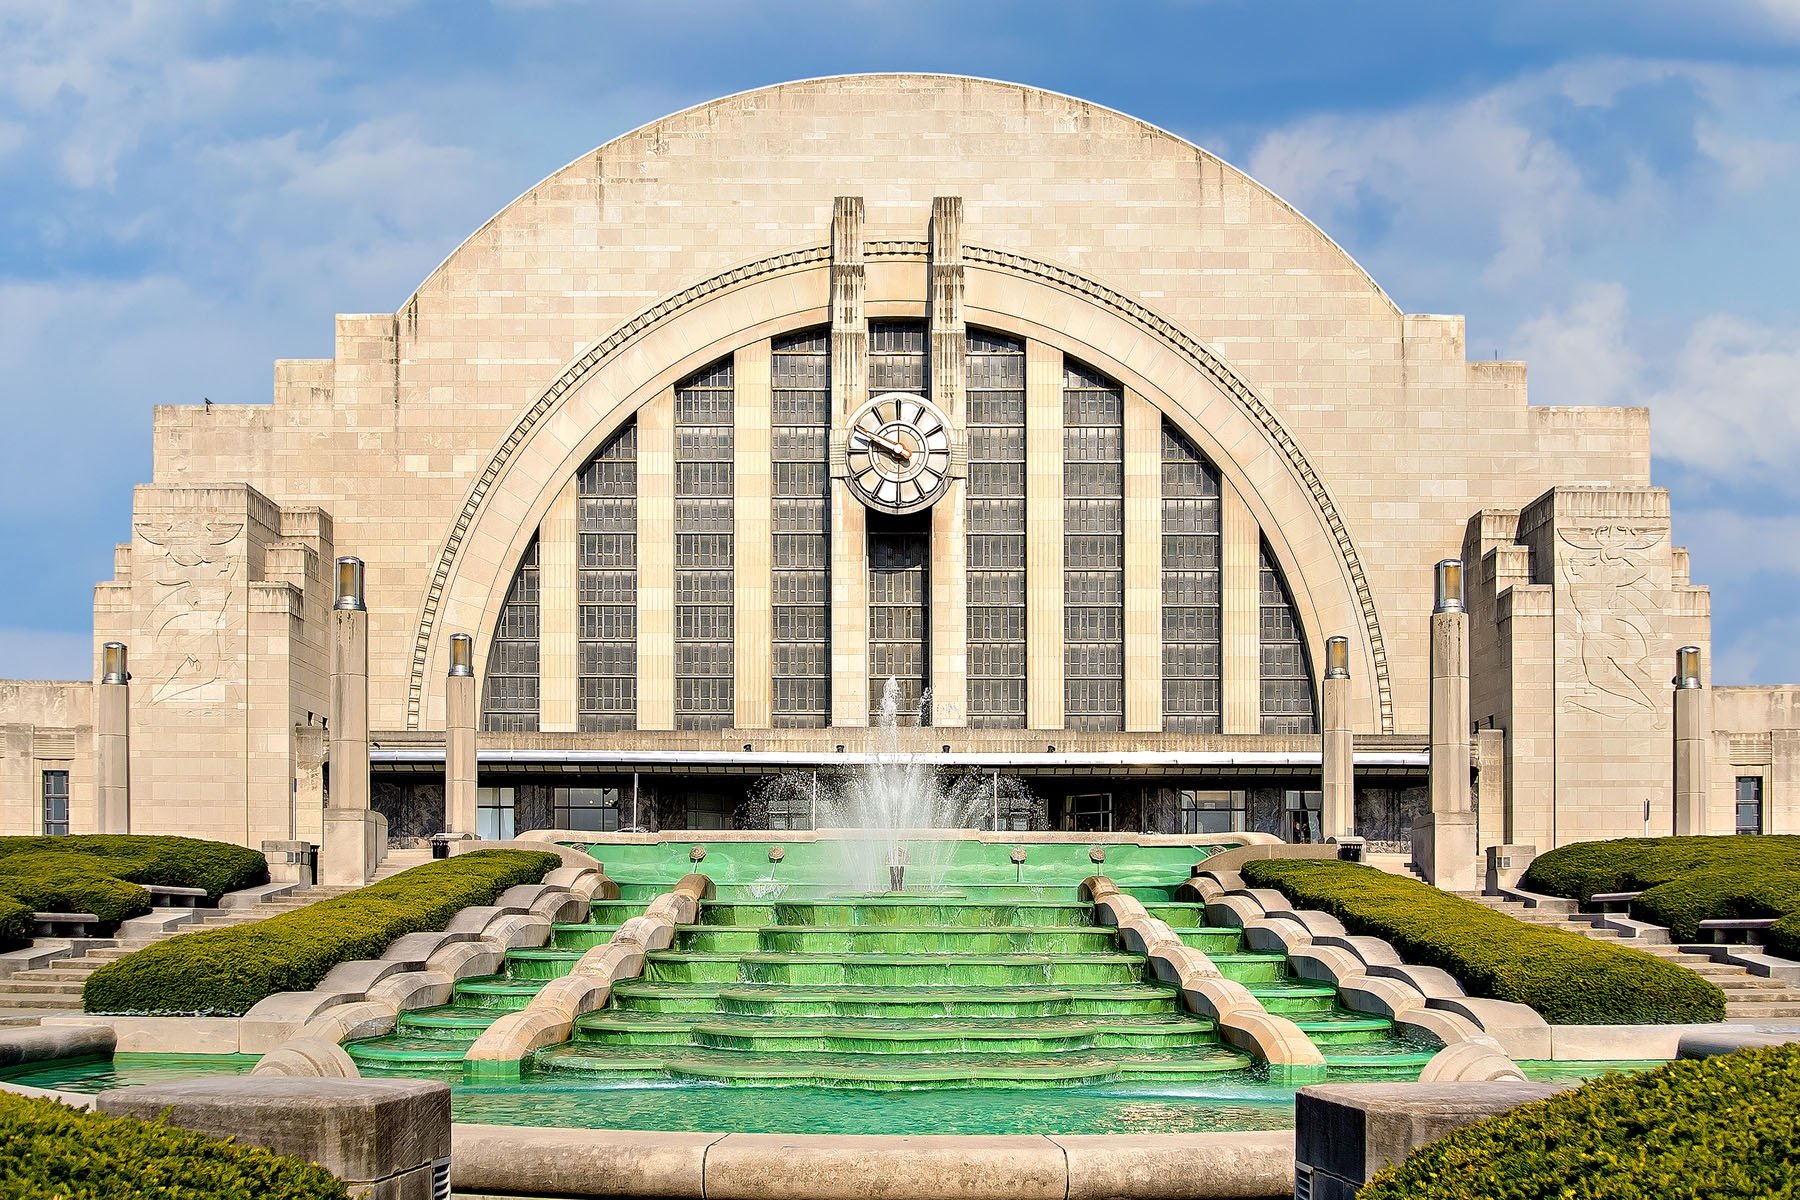 UNION - To us of the older generation, this will always be known as Union Terminal. To those with fewer years to their credit, it is referred to as the Museum Center.